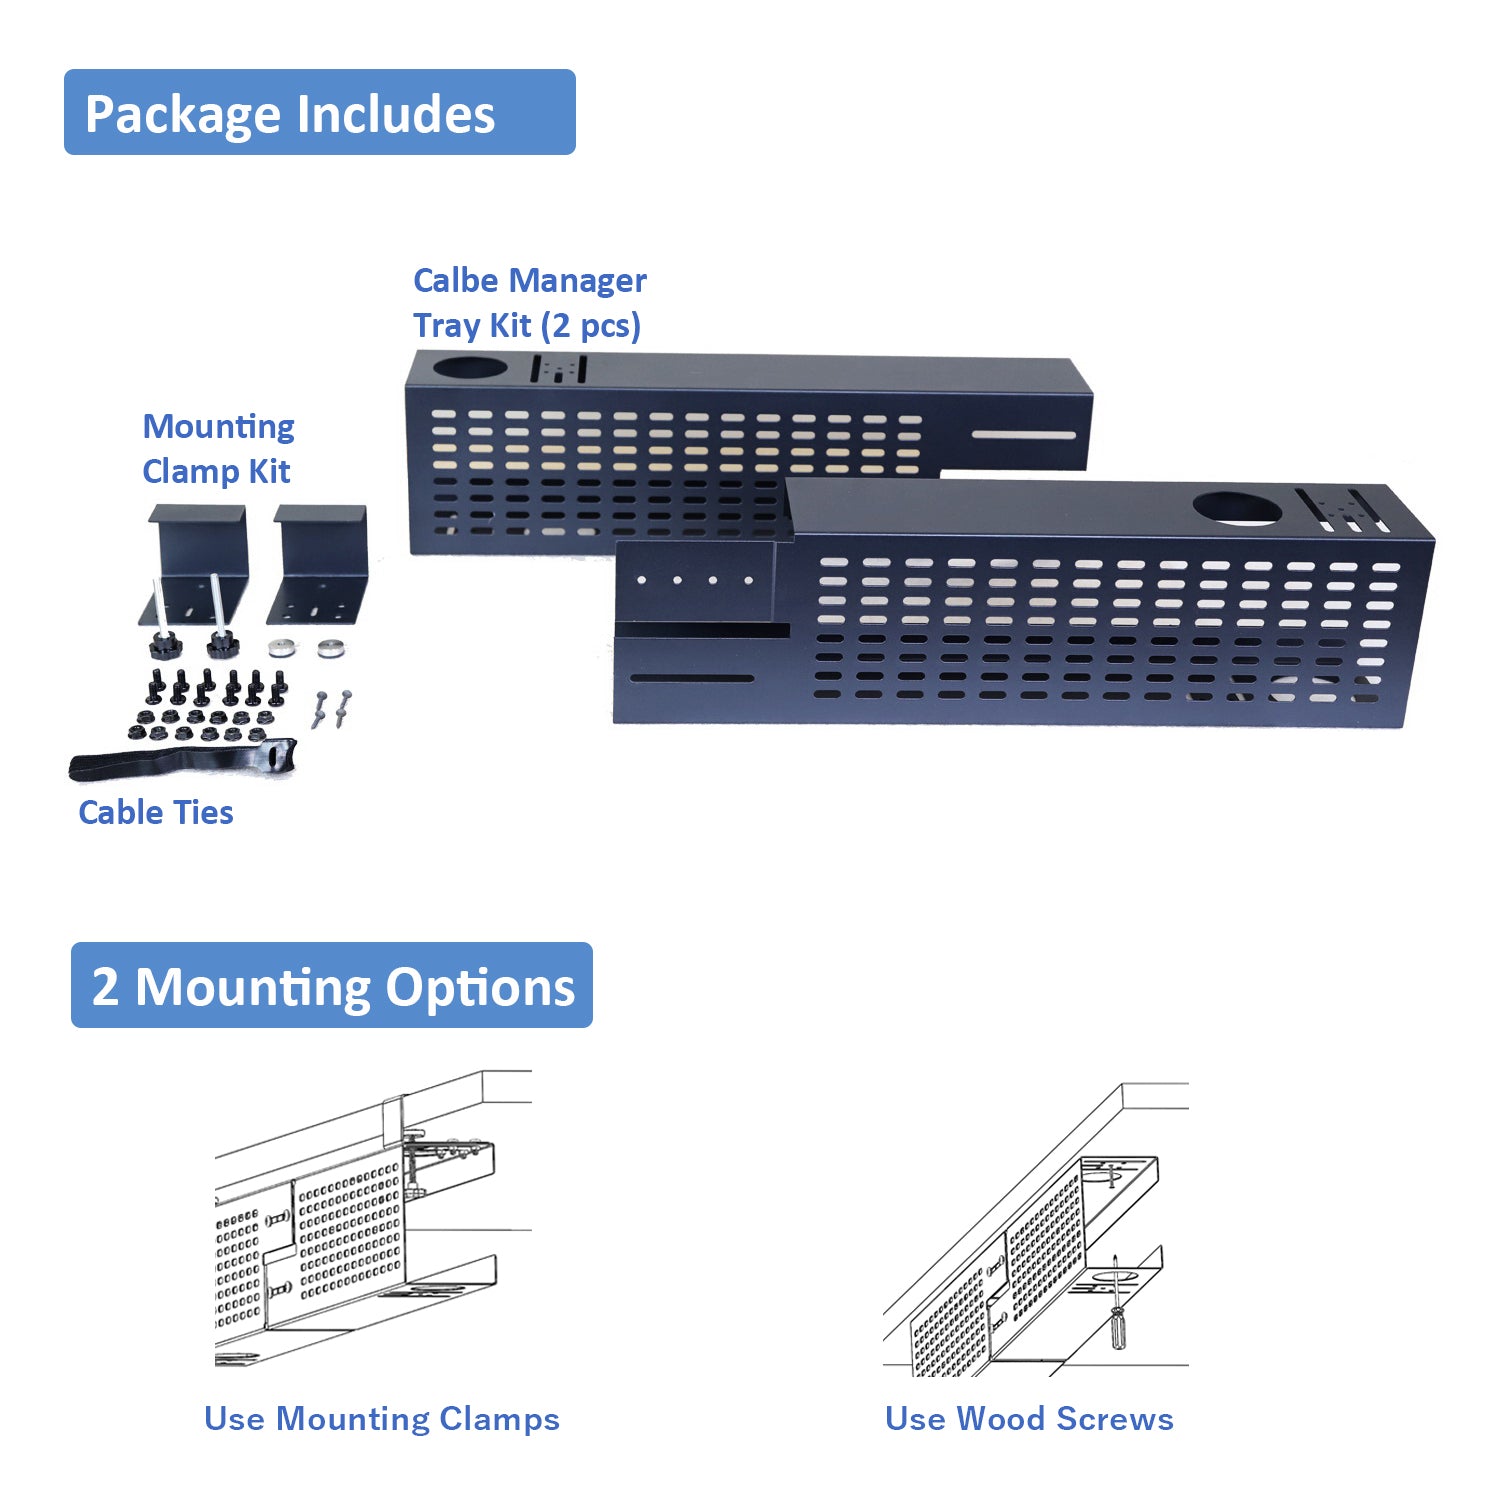 Clamp-on Cable Management Racks